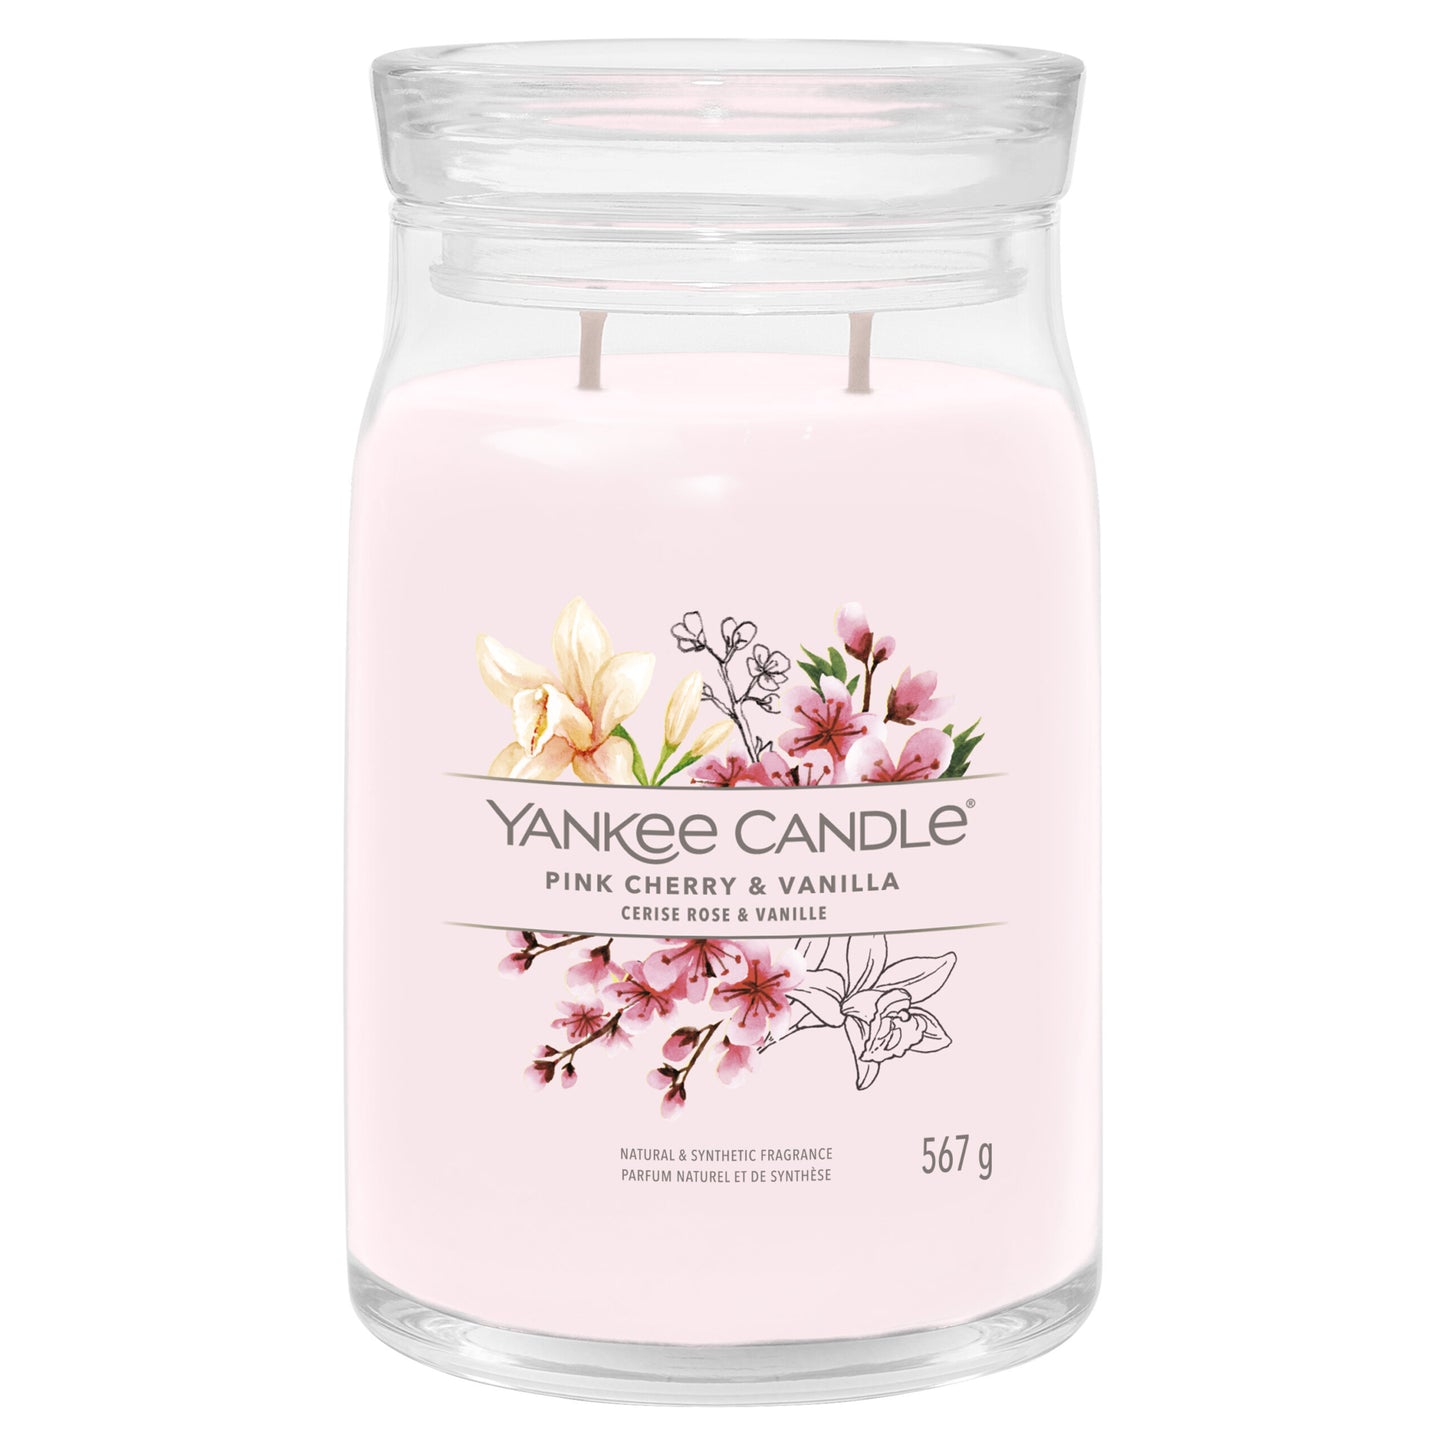 YANKEE CANDLE SIGNATURE COLLECTION LARGE JAR